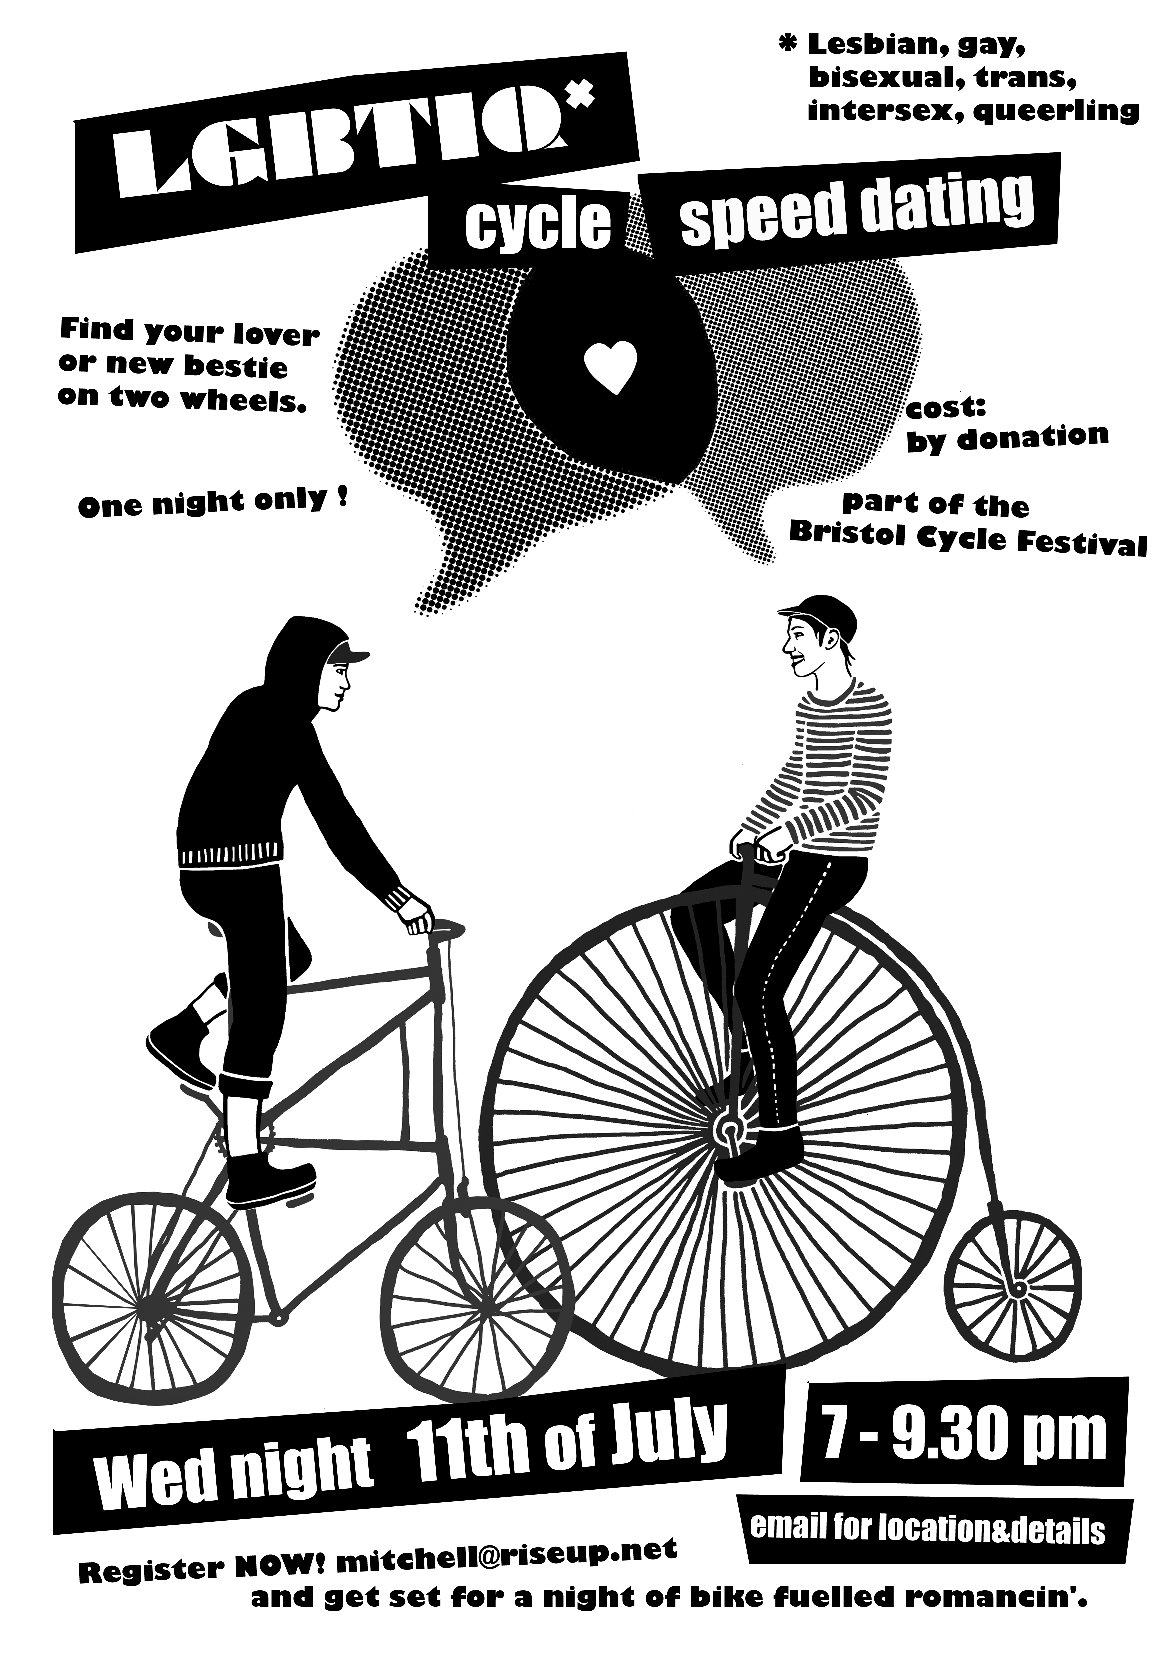 just as cool as anarchy radio- LGBTIQ* cycle speed dating